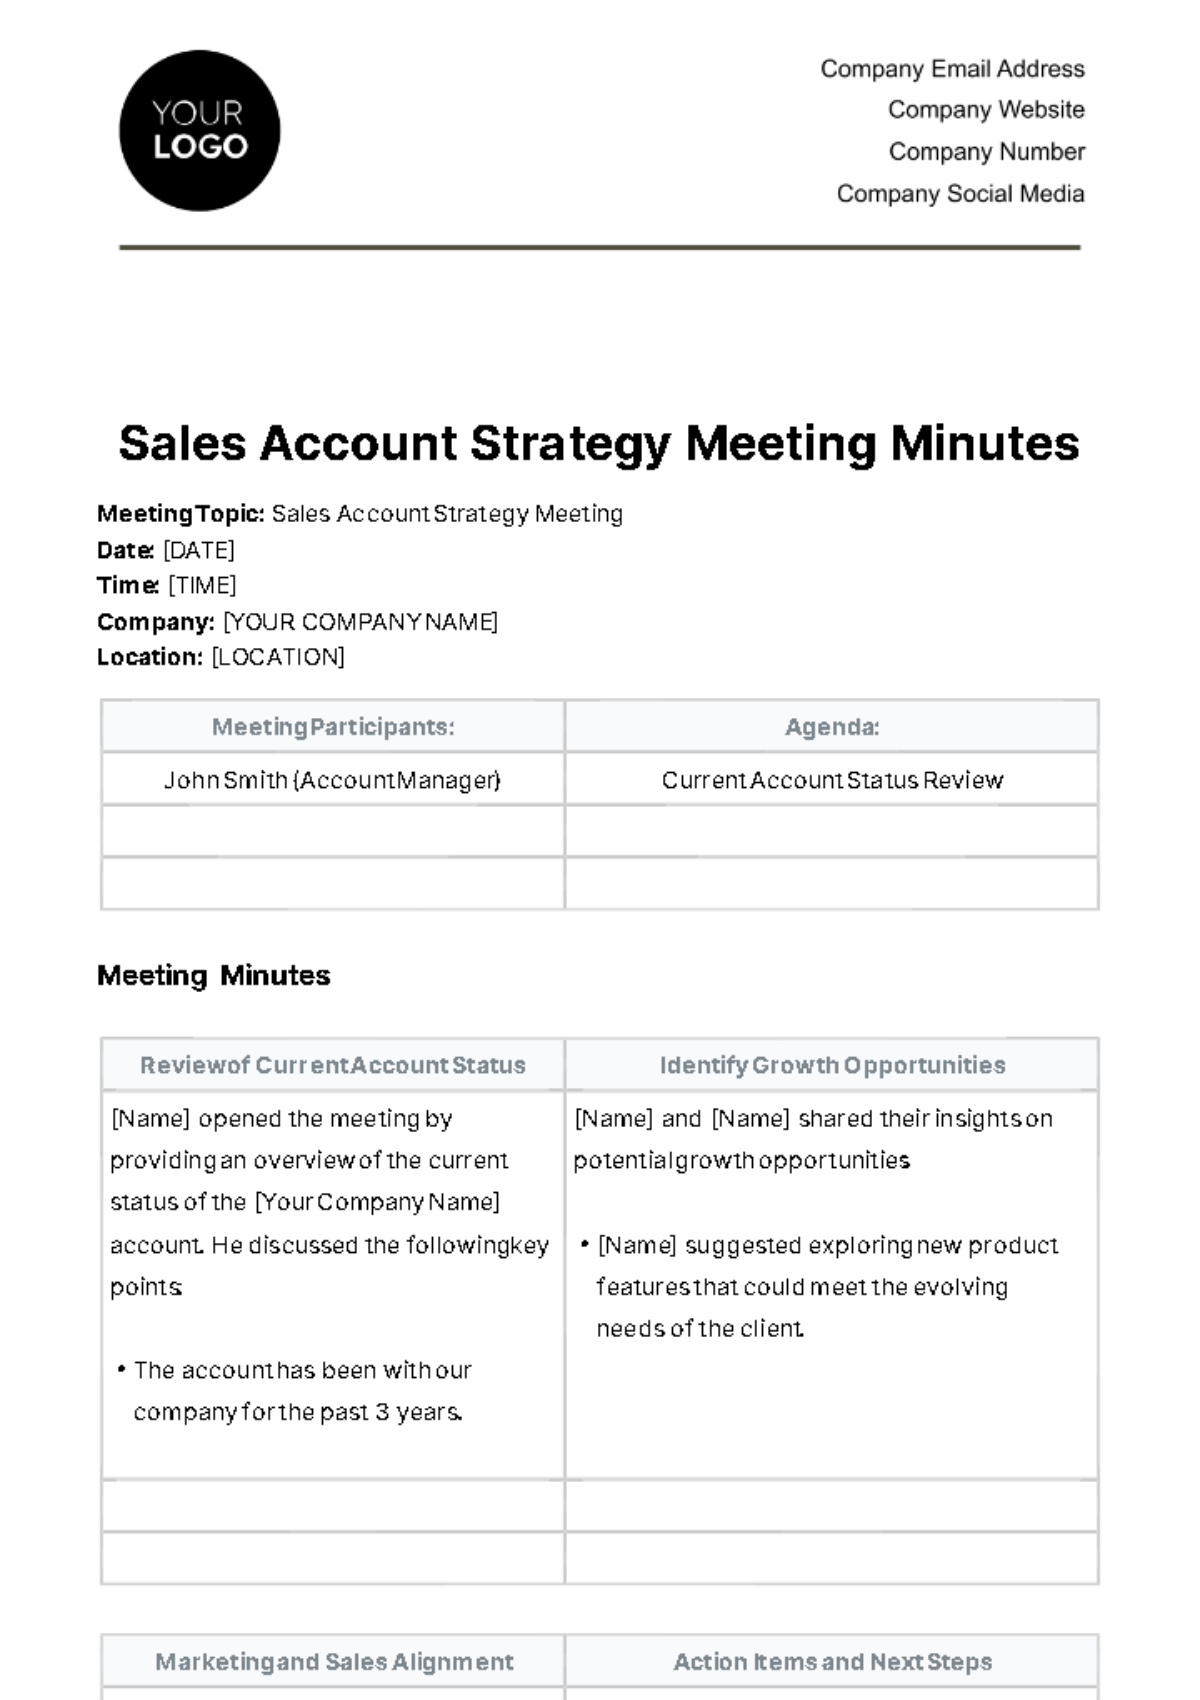 Sales Account Strategy Meeting Minute Template